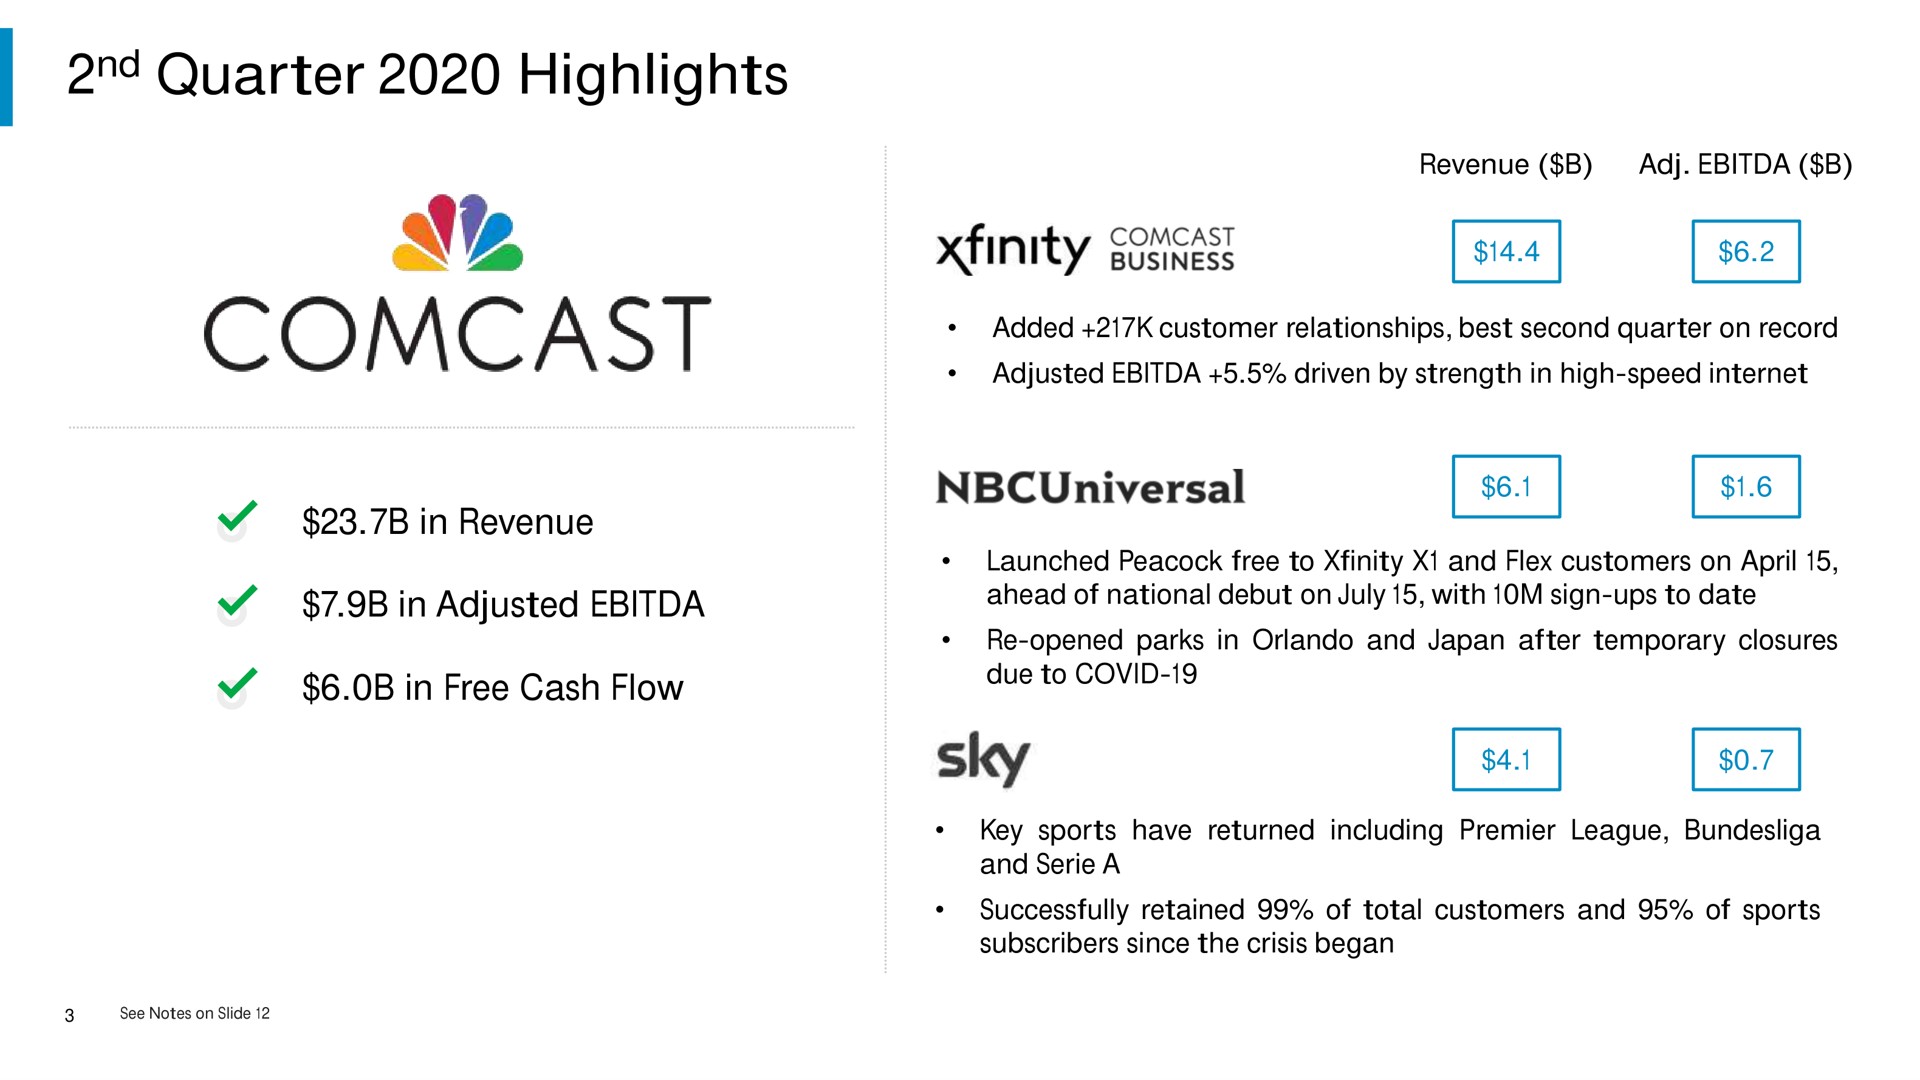 quarter highlights in revenue in adjusted in free cash flow revenue adjusted driven by strength in high speed launched peacock free to and flex customers on ahead of national debut on with sign ups to date opened parks in and japan after temporary closures due to covid sky key sports have returned including premier league and a successfully retained of total customers and of sports subscribers since the crisis began | Comcast